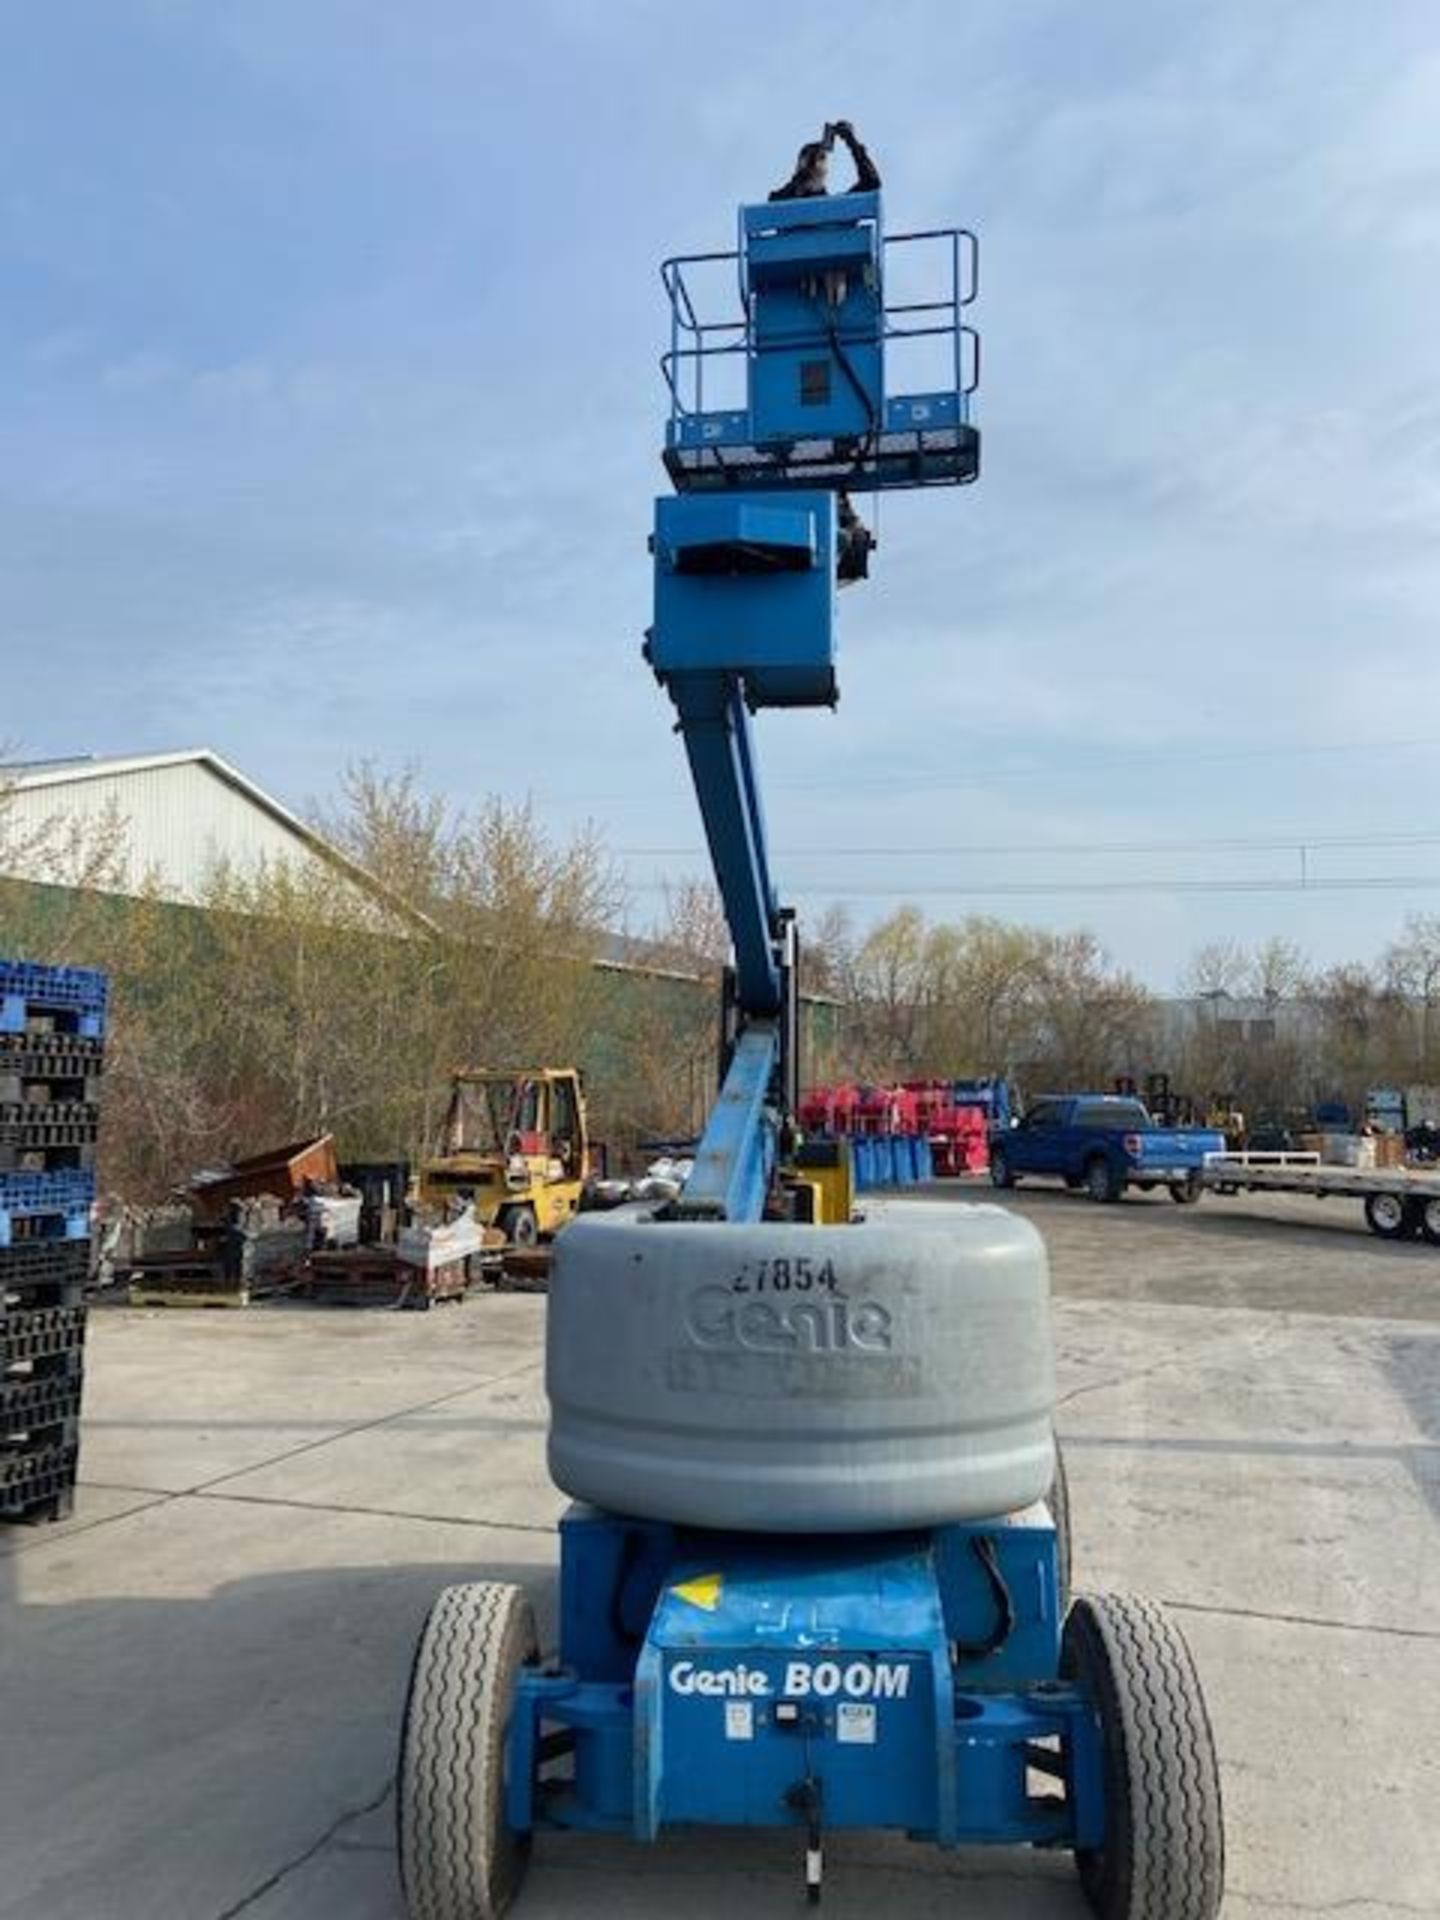 FREE CUSTOMS MINT 2006 Genie Zoom Boom Articulating Lift model Z45/25 45' height Electric LOW HOURS - Image 3 of 4